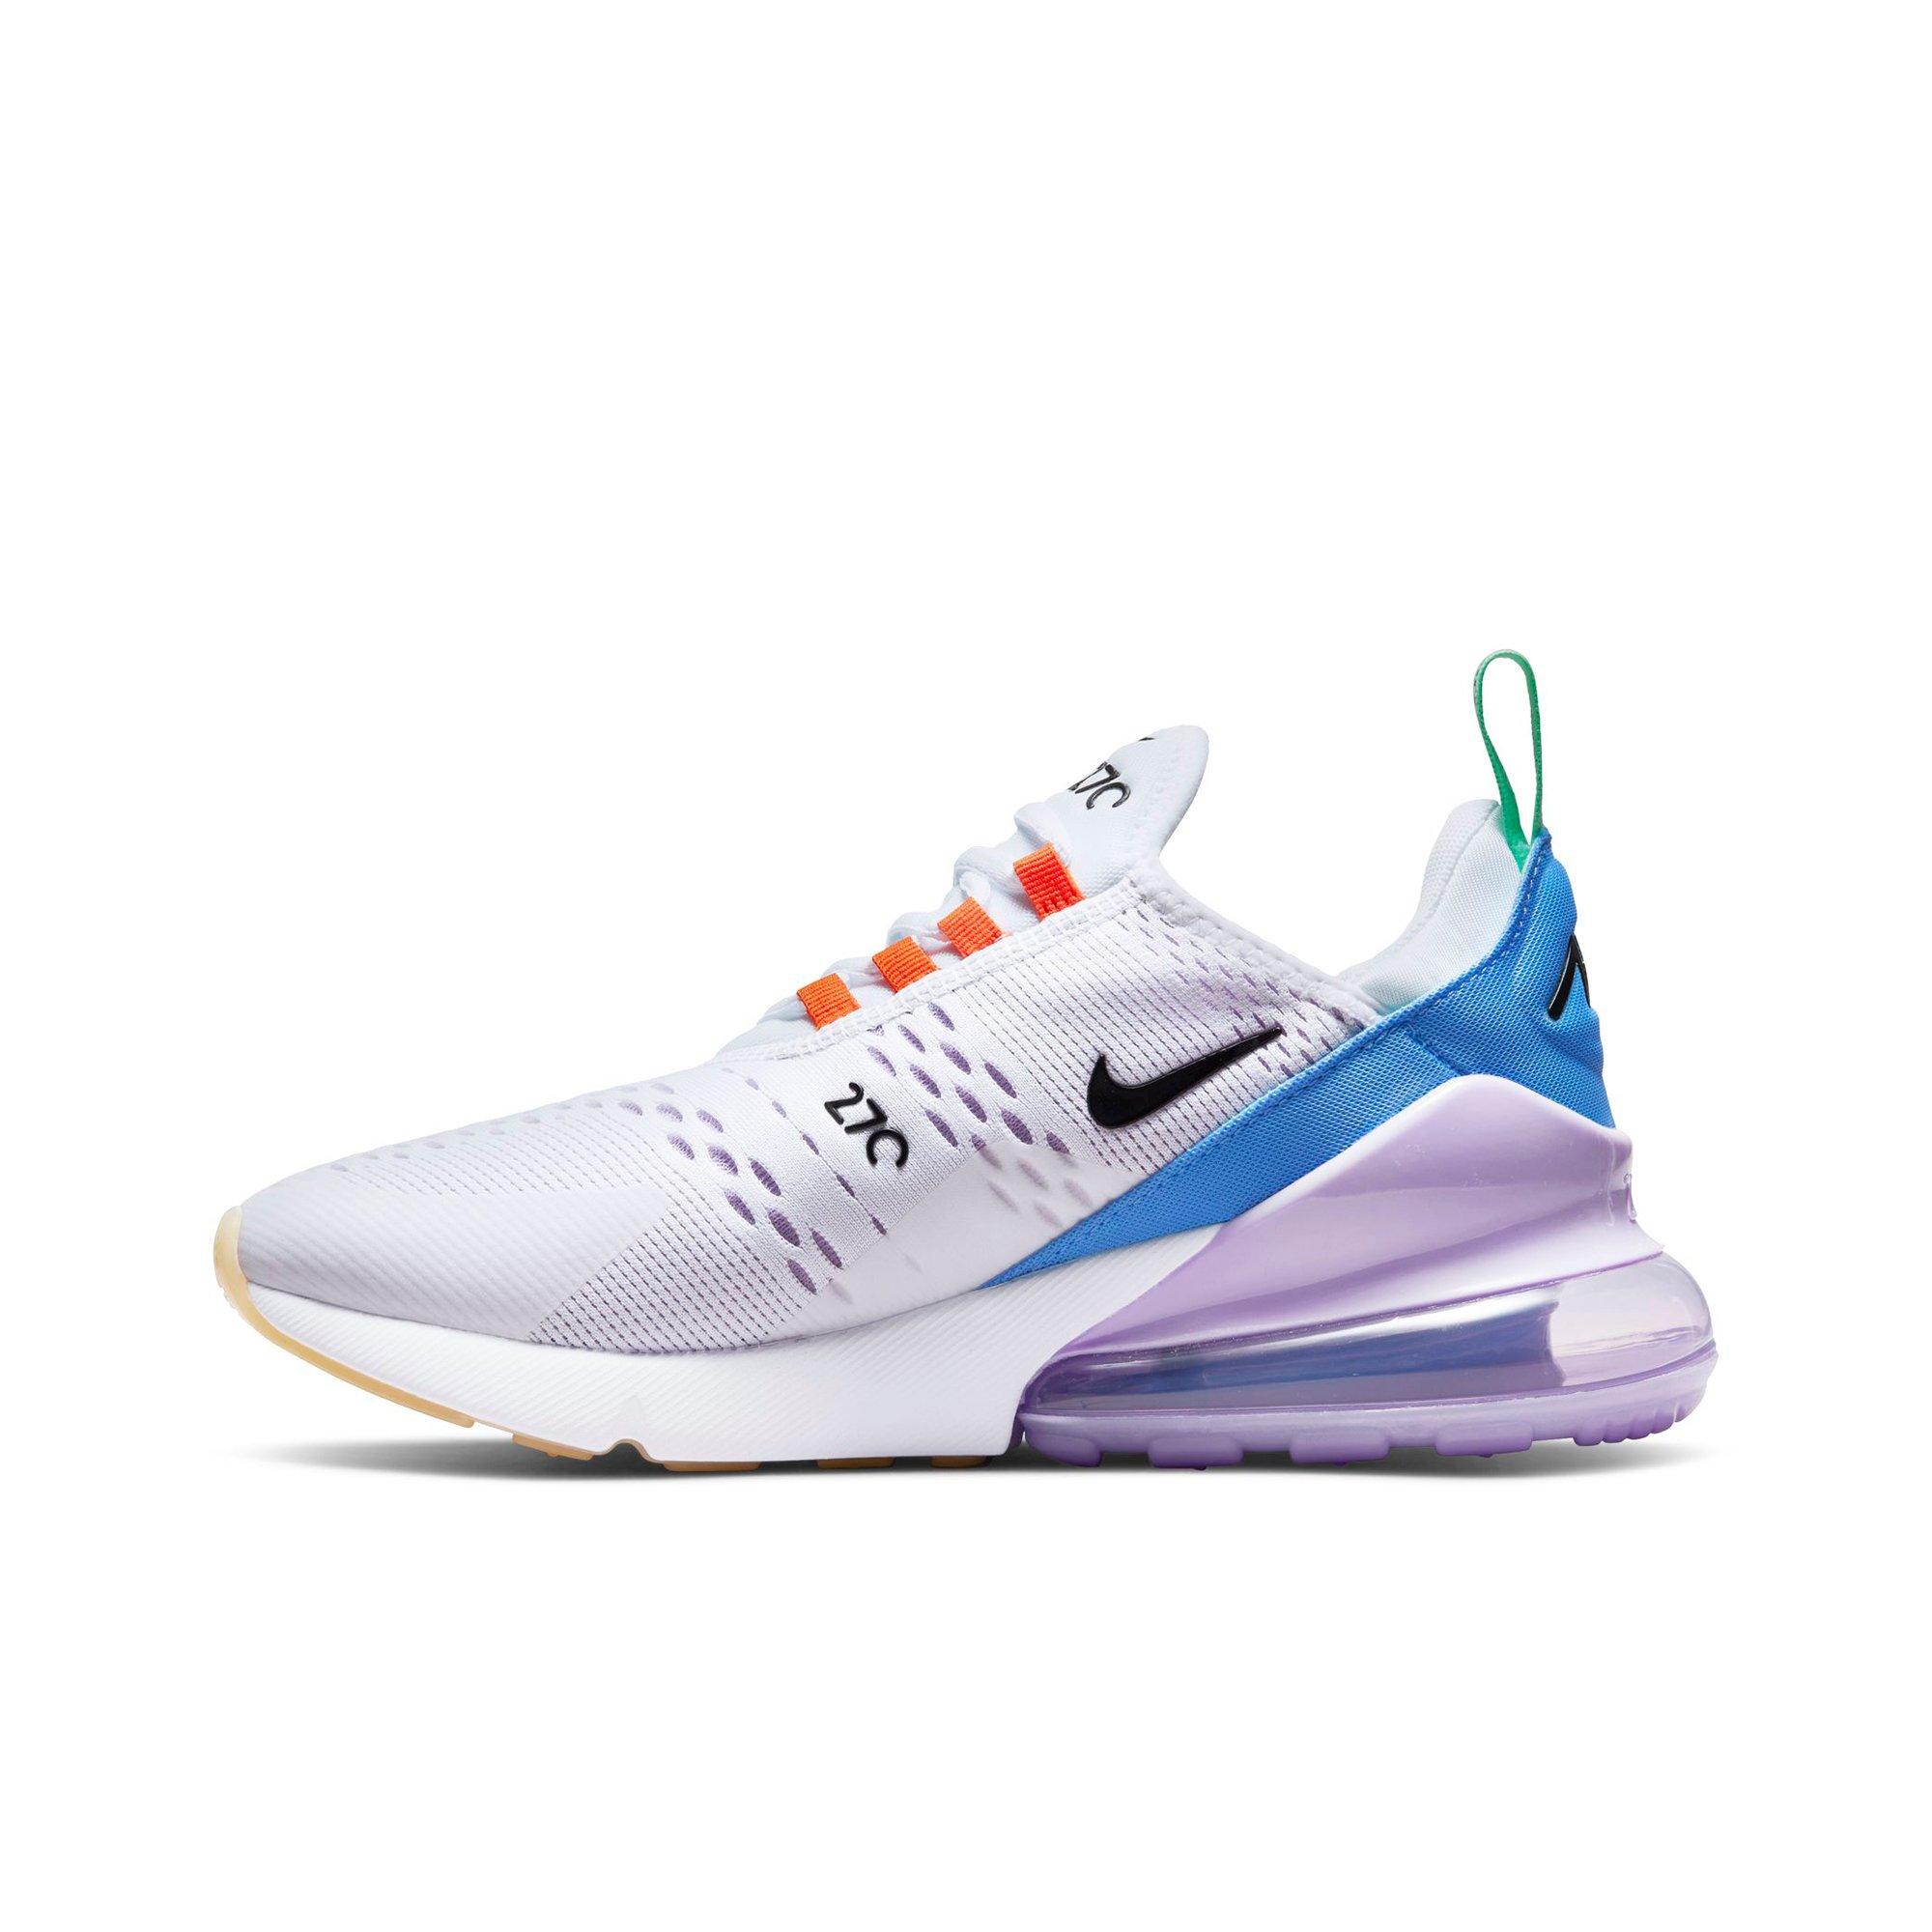 Air Max 270 "White/Lilac/Safety Women's Shoe